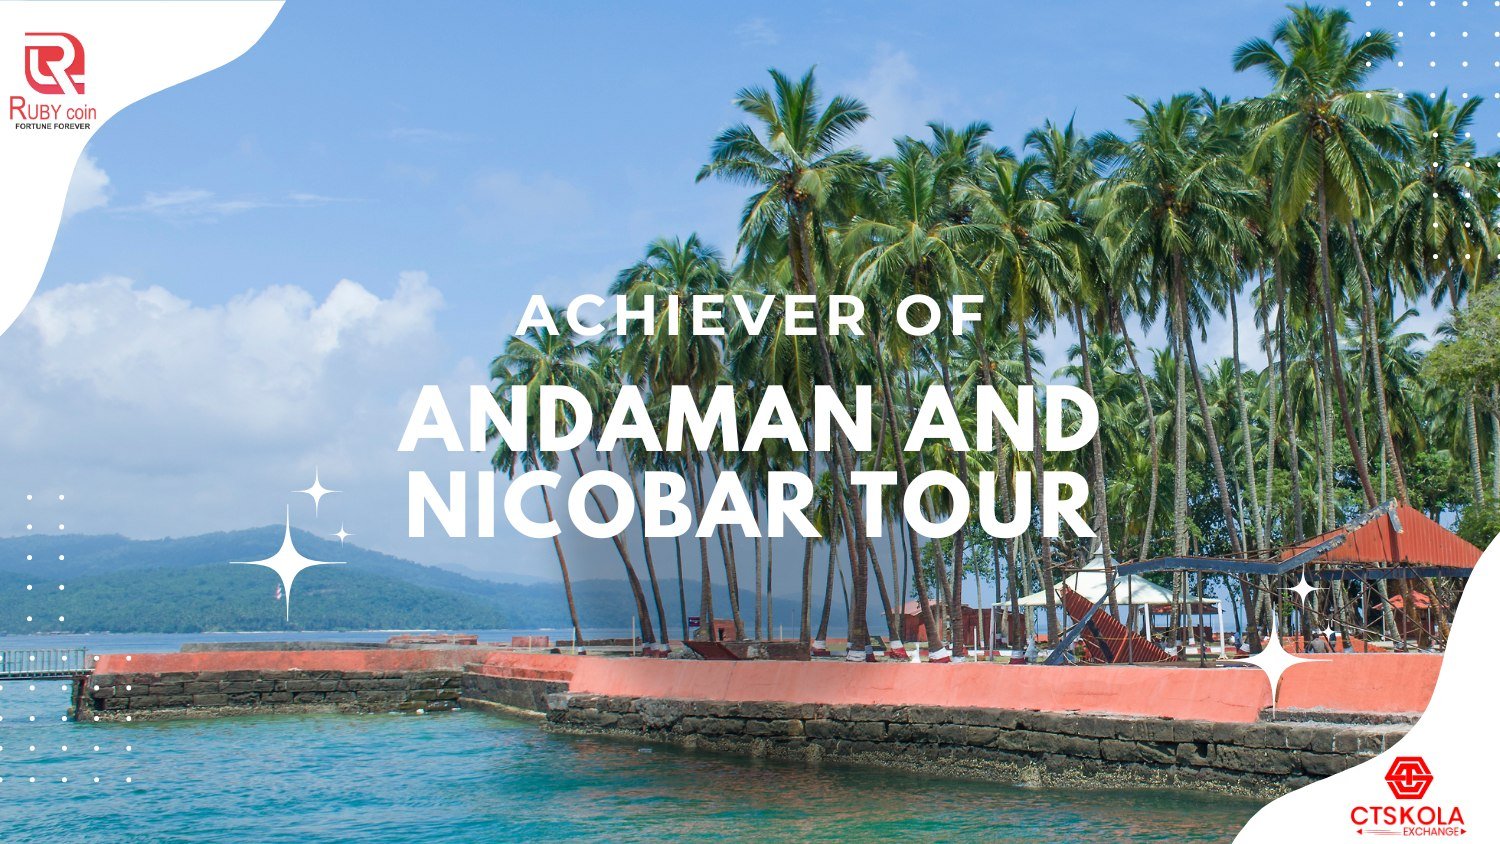 Ruby Coins Rewarding Andaman and Nicobar Tour for Achievers